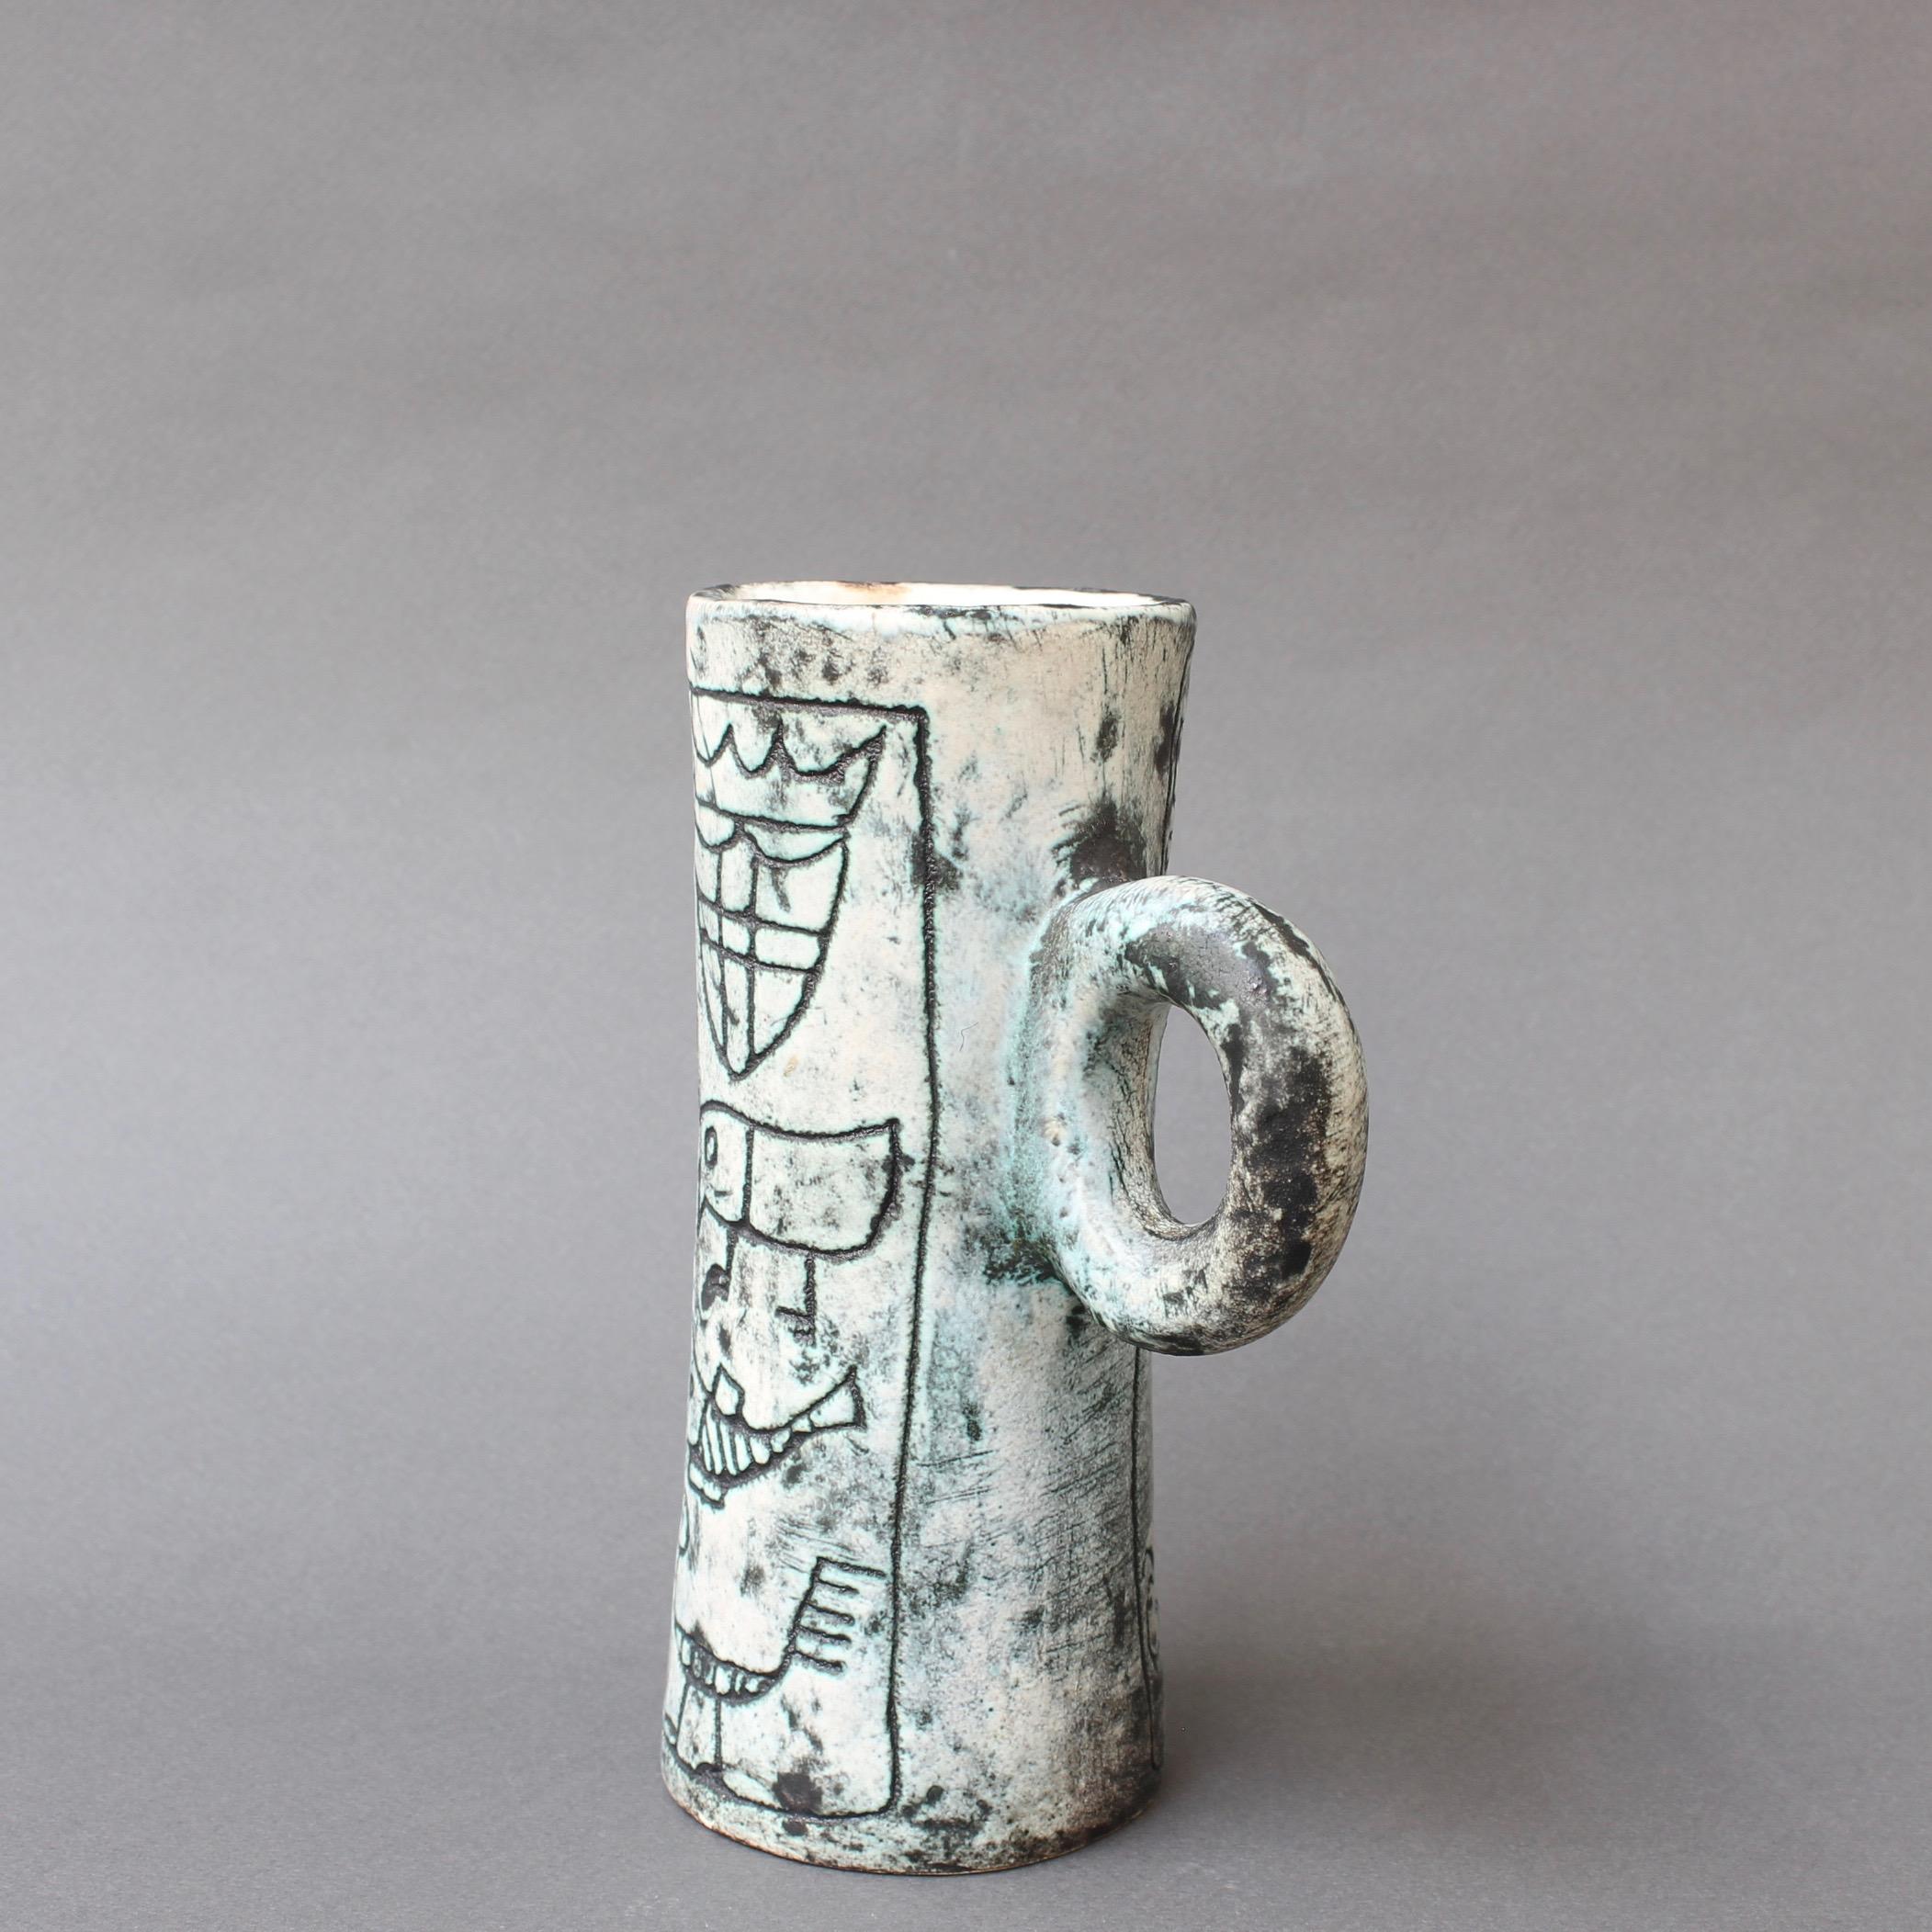 Mid-Century Modern Midcentury Ceramic Decorative Pitcher by Jacques Blin, circa 1950s, Small